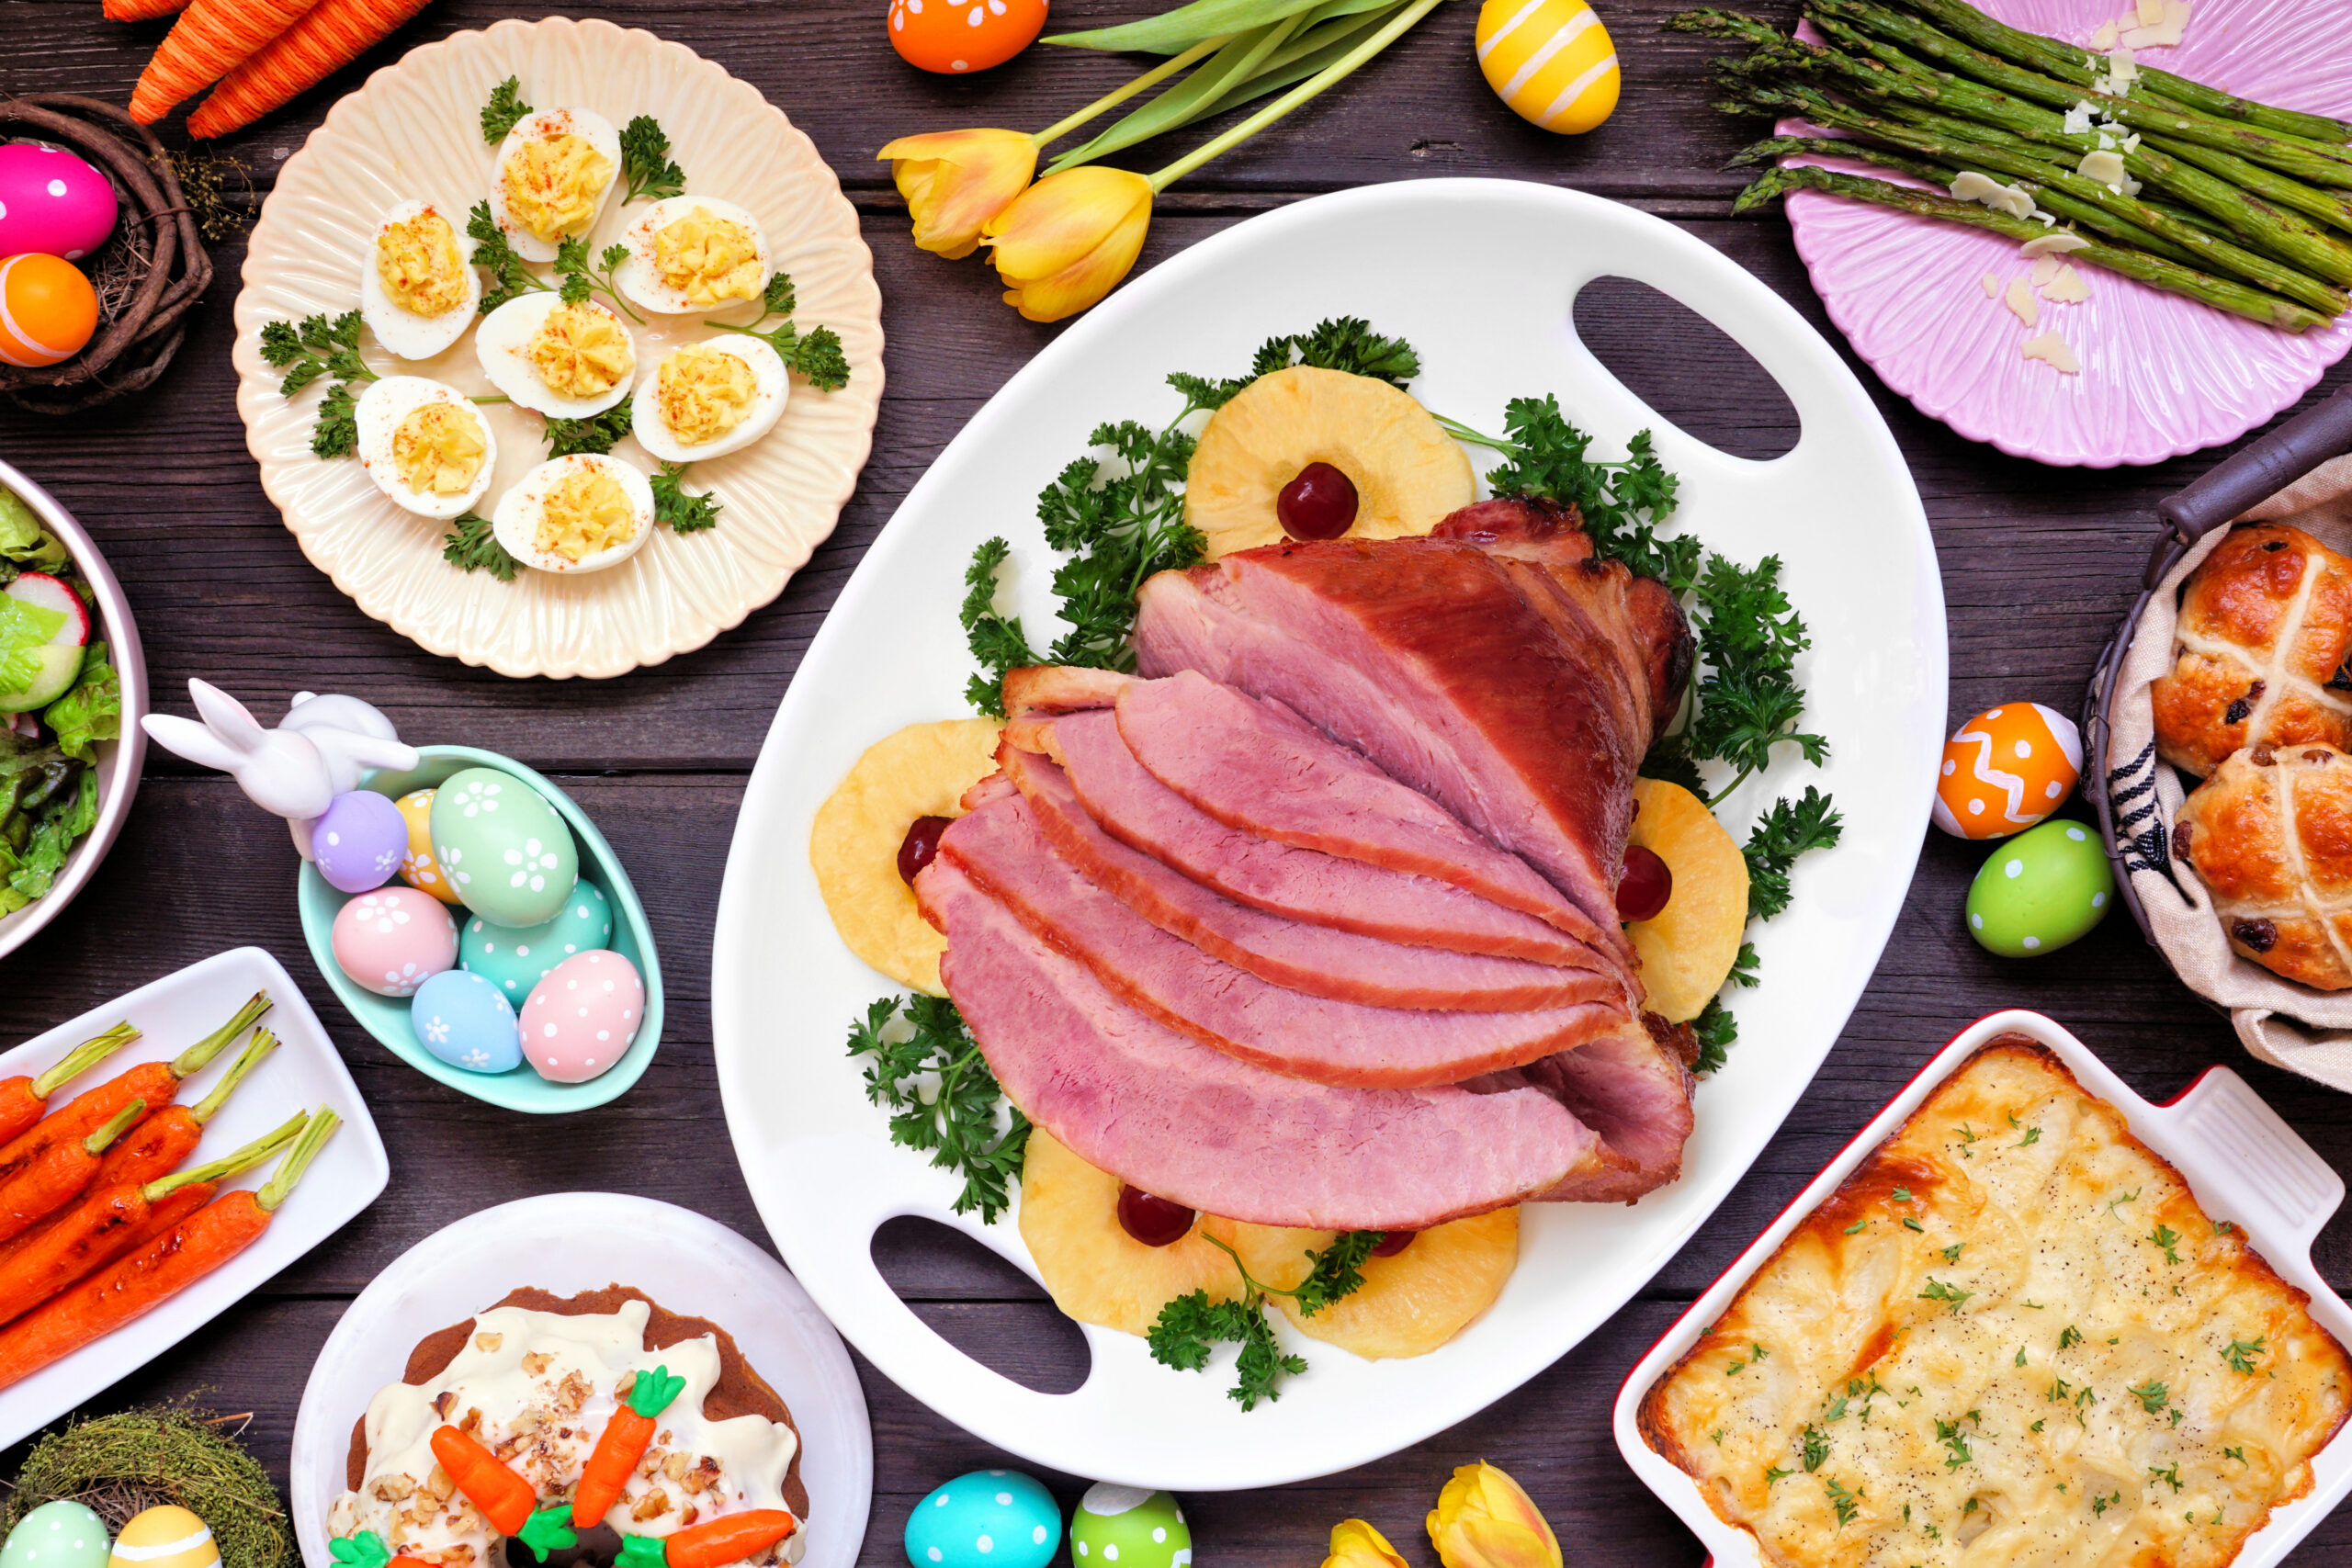 Traditional Easter ham dinner. Above view table scene on a dark wood background. Ham, scalloped potatoes, eggs, hot cross buns, carrot cake and vegetables.